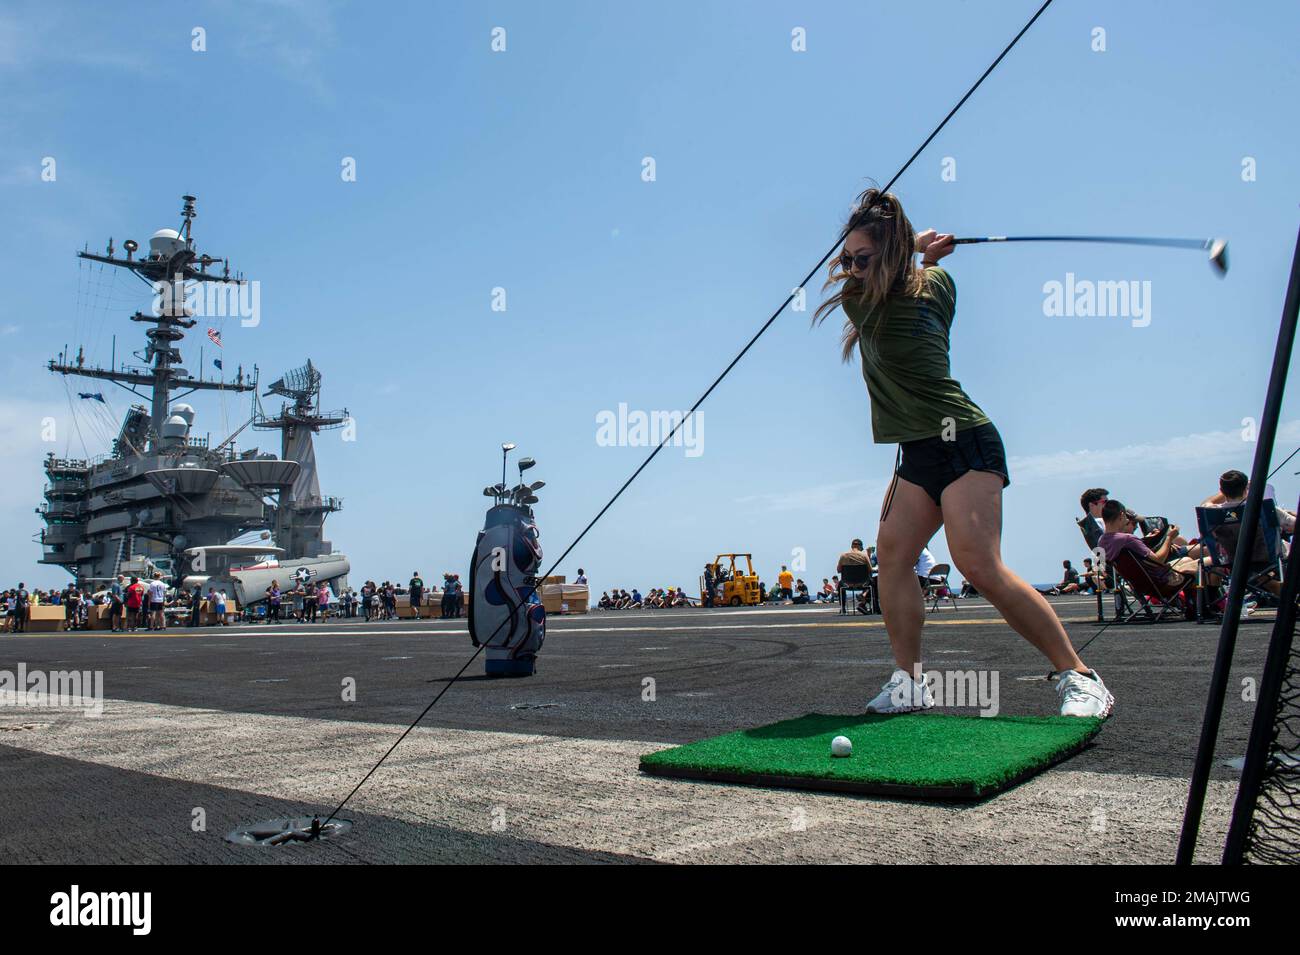 220528-N-GP384-1053 ADRIATIC SEA (May 28, 2022) Lt. j.g. Steffi Yo, from Tampa, Florida, swings a golf club on the flight deck of USS Harry S. Truman (CVN 75), during a steel beach picnic, May 28, 2022. The Harry S. Truman Carrier Strike Group is on a scheduled deployment in the U.S. Naval Forces Europe area of operations, employed by U.S. Sixth Fleet to defend U.S., Allied and Partner interests. Stock Photo